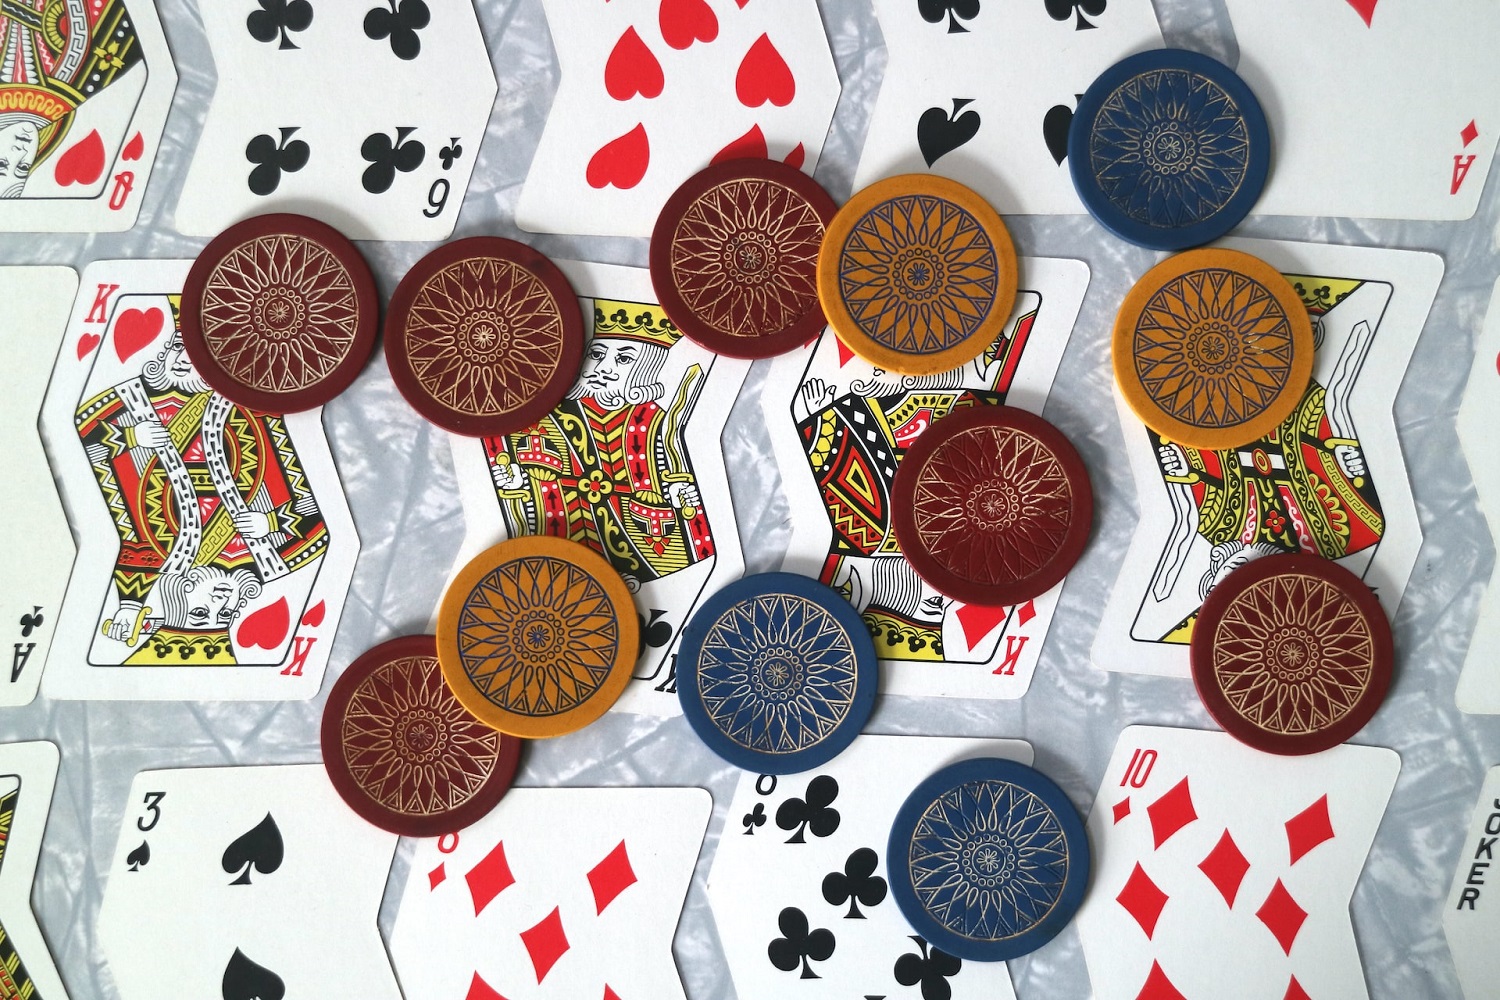 How To Play Poker: 5 Keys To Learn The Games